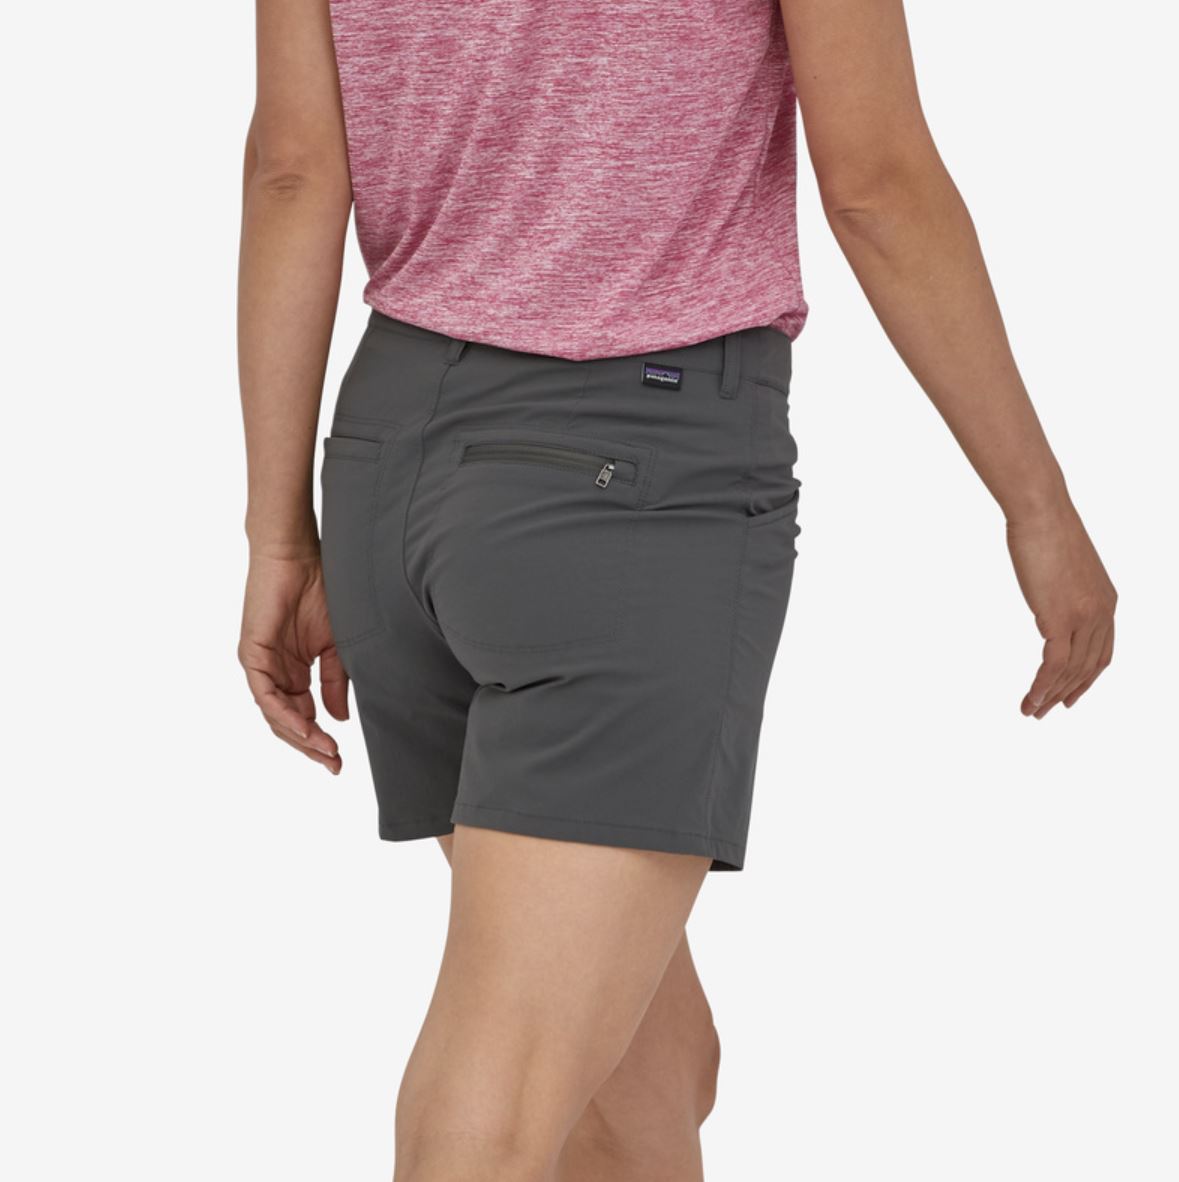 patagonia womens quandary short 5 inch in forge grey, back view on a model